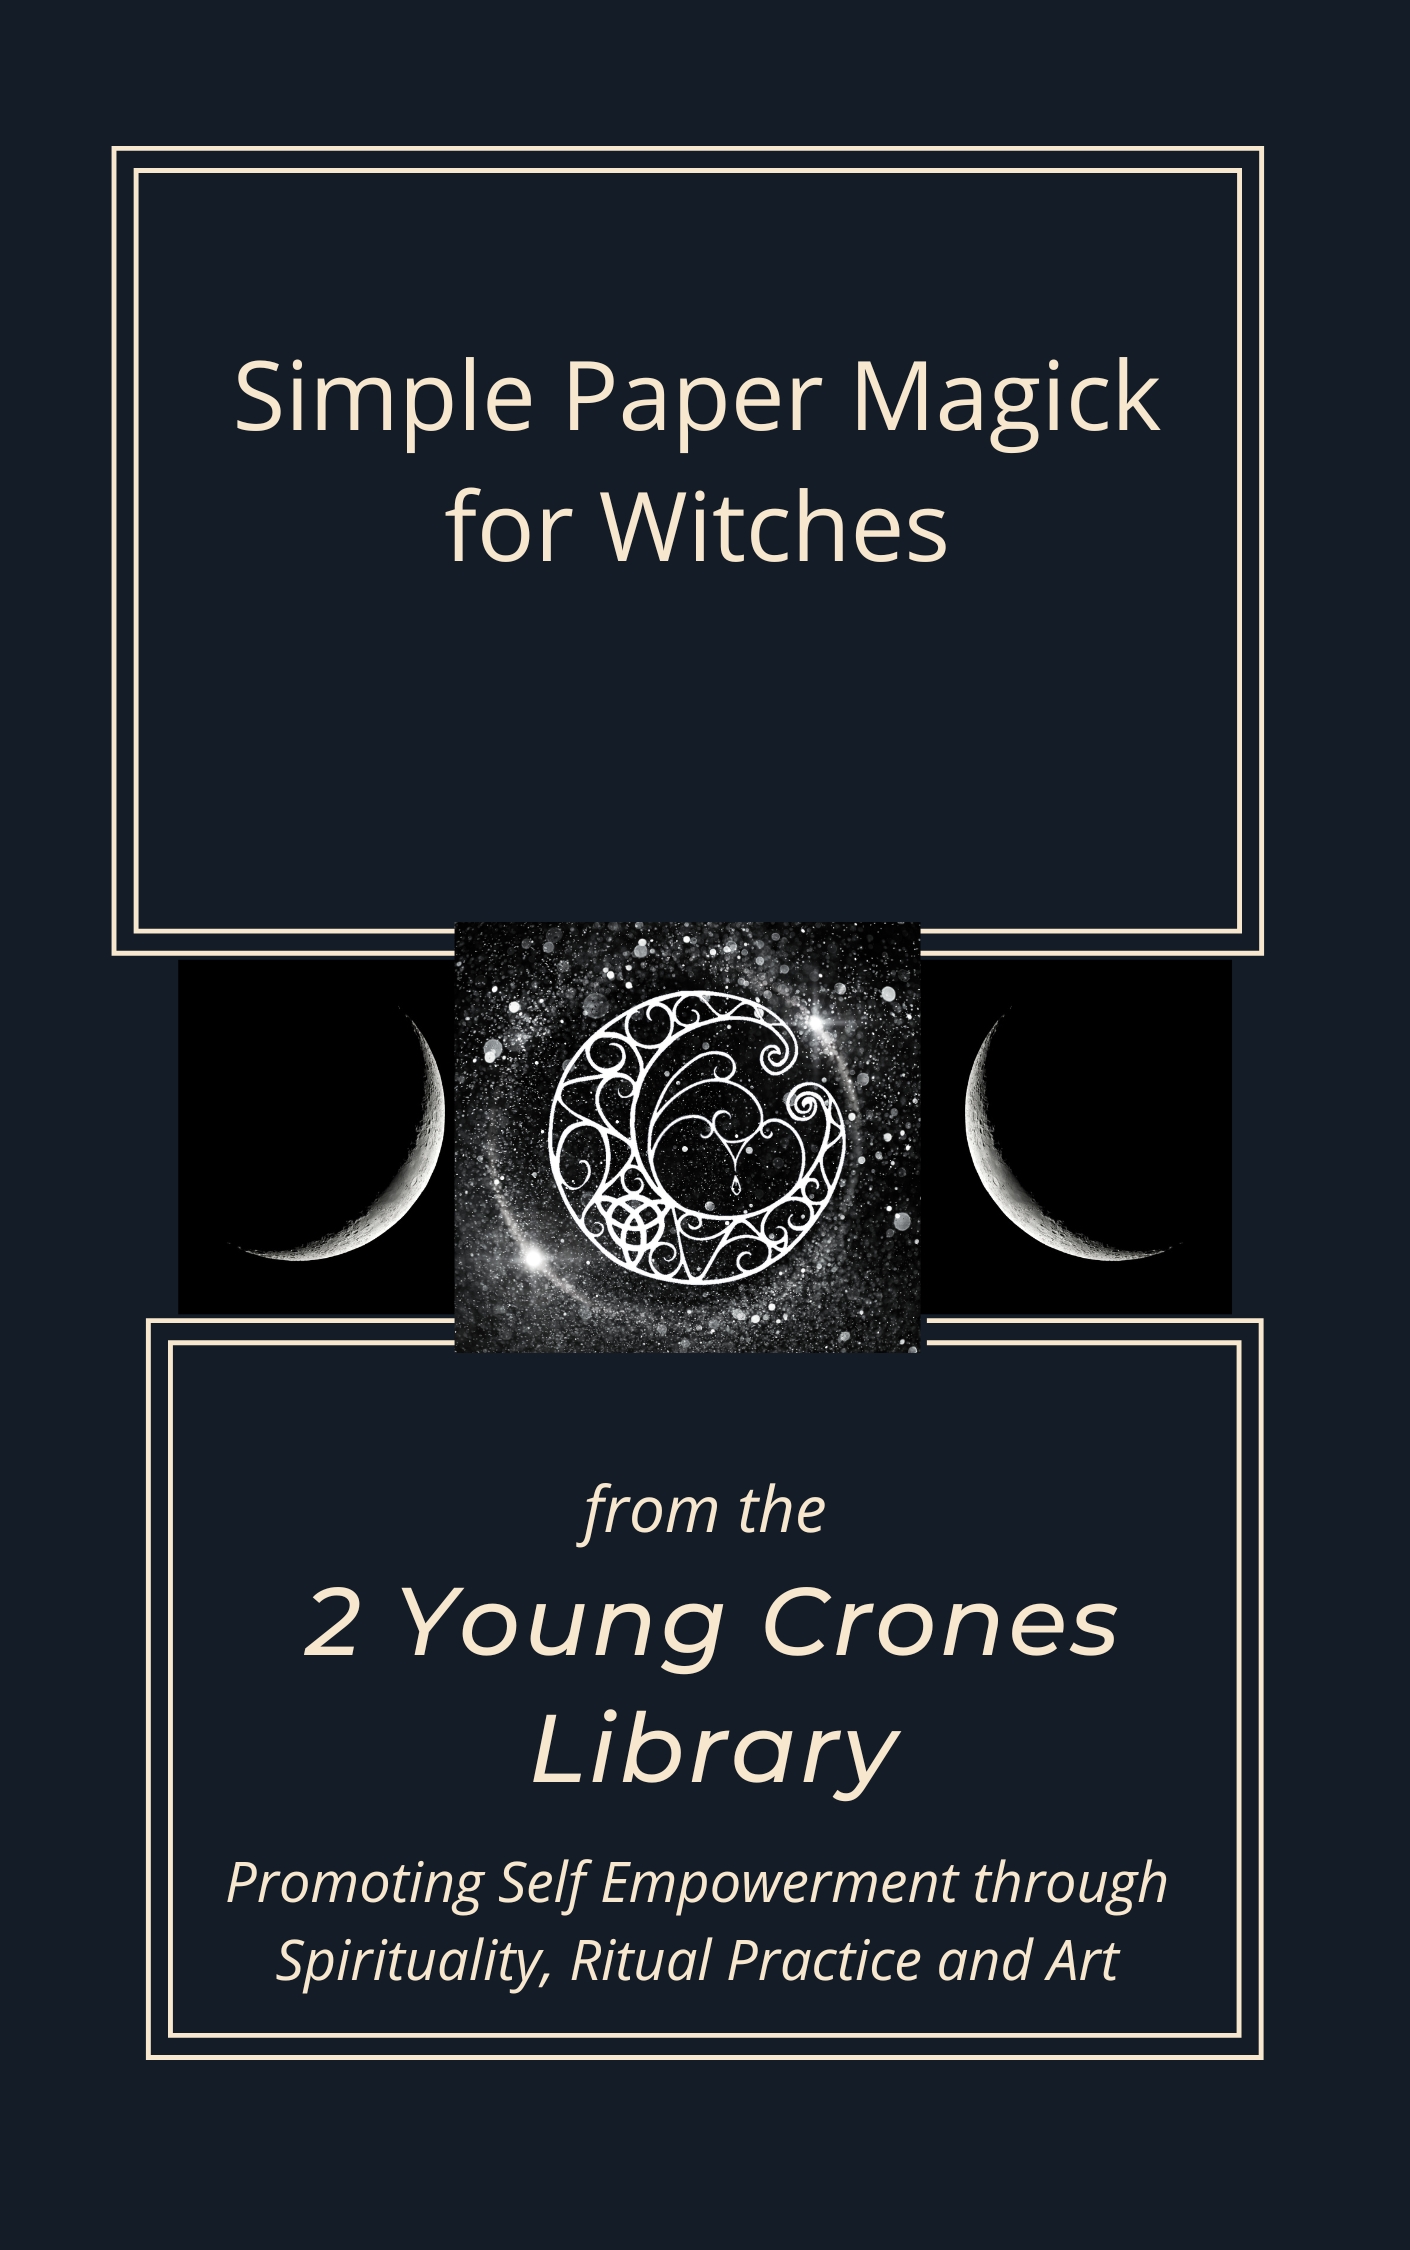 Simple Paper Magick for Witches